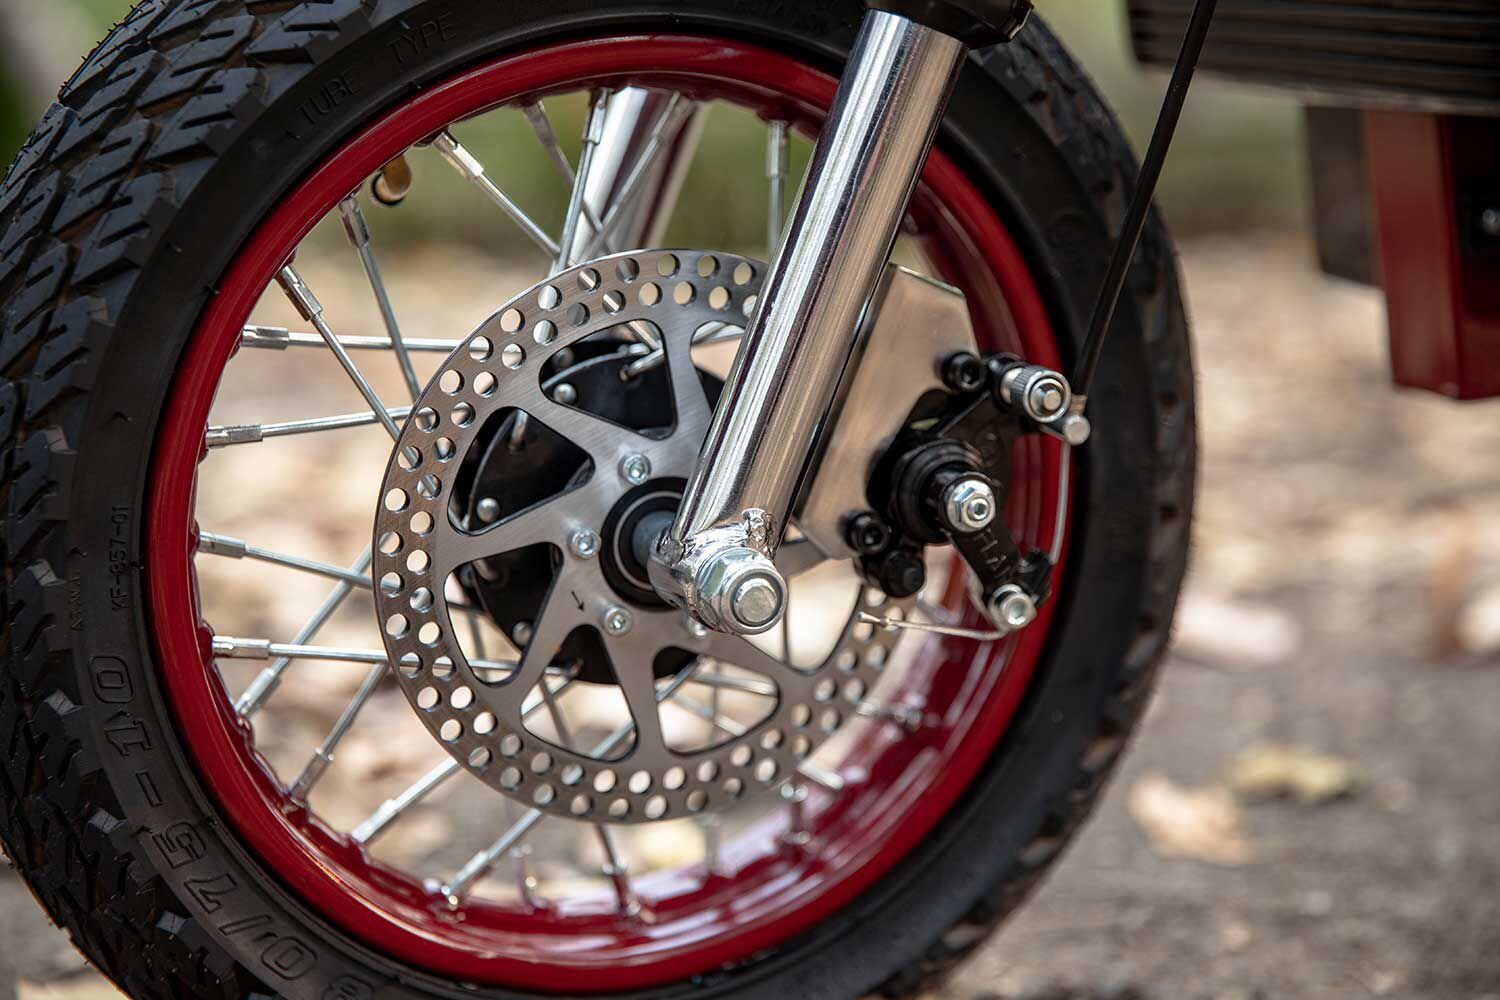 Lever-actuated dual brakes bring the eFTR to a stop.